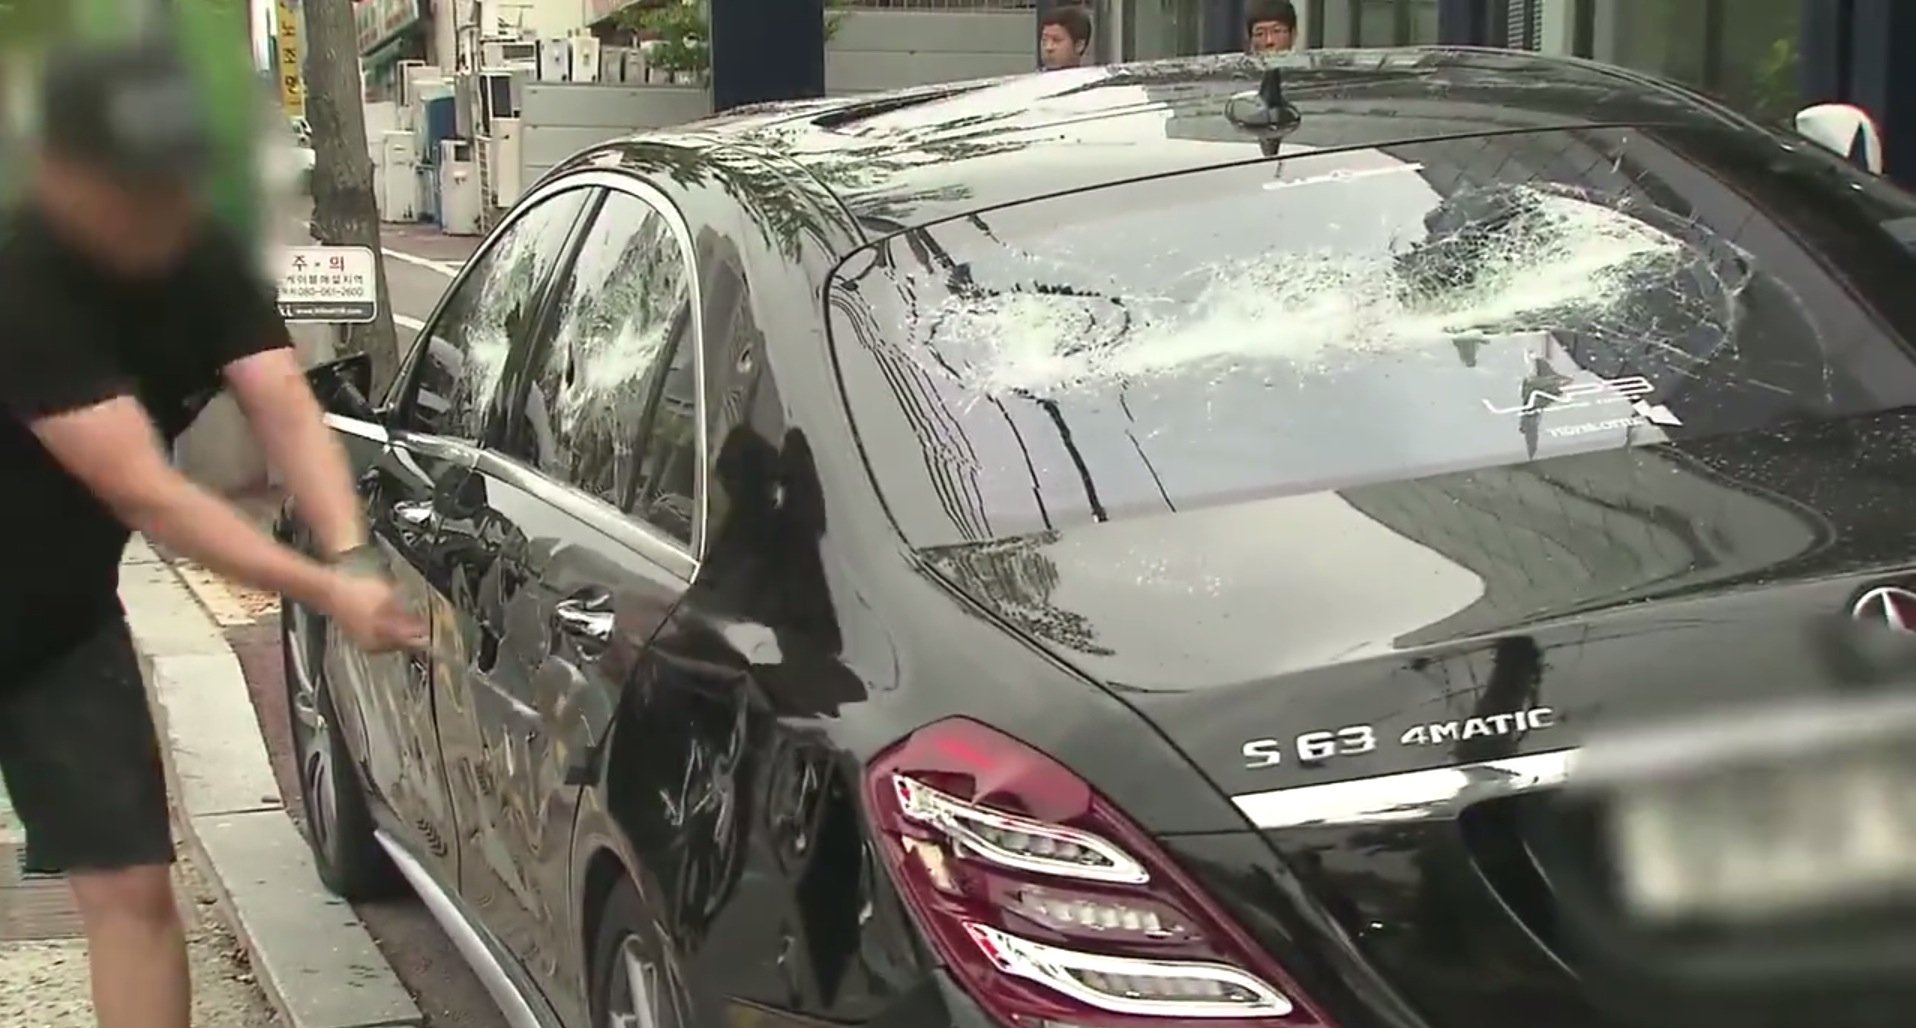 Video - Frustrated with poor service man destroys his $200k Mercedes S63 AMG with a golf club - Luxurylaunches